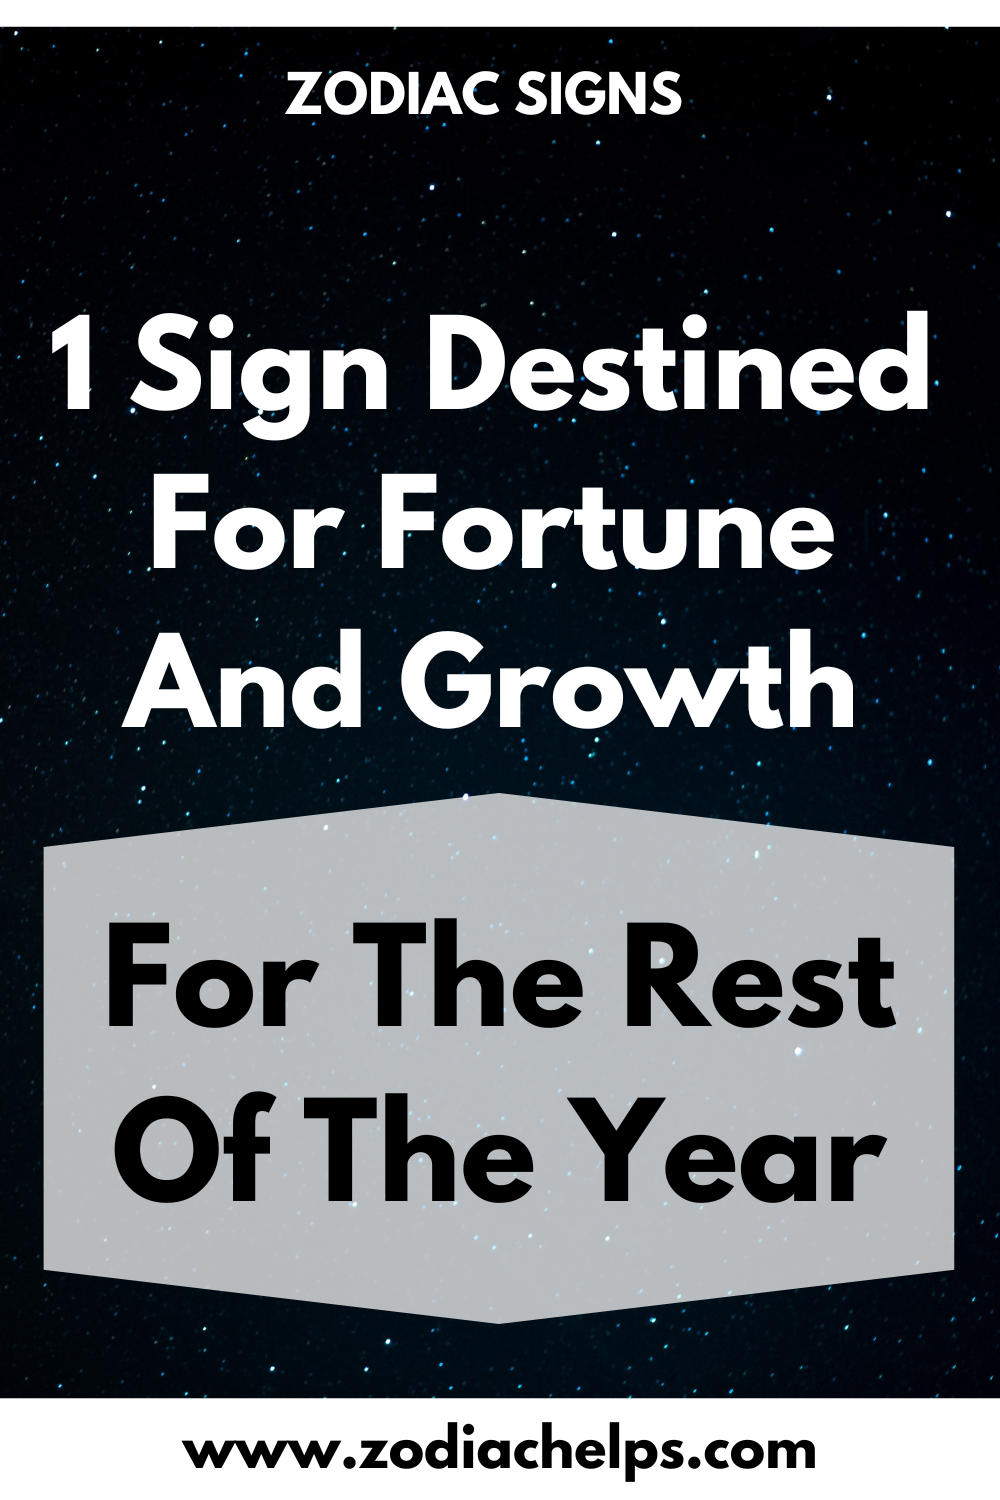 1 Sign Destined For Fortune And Growth For The Rest Of The Year